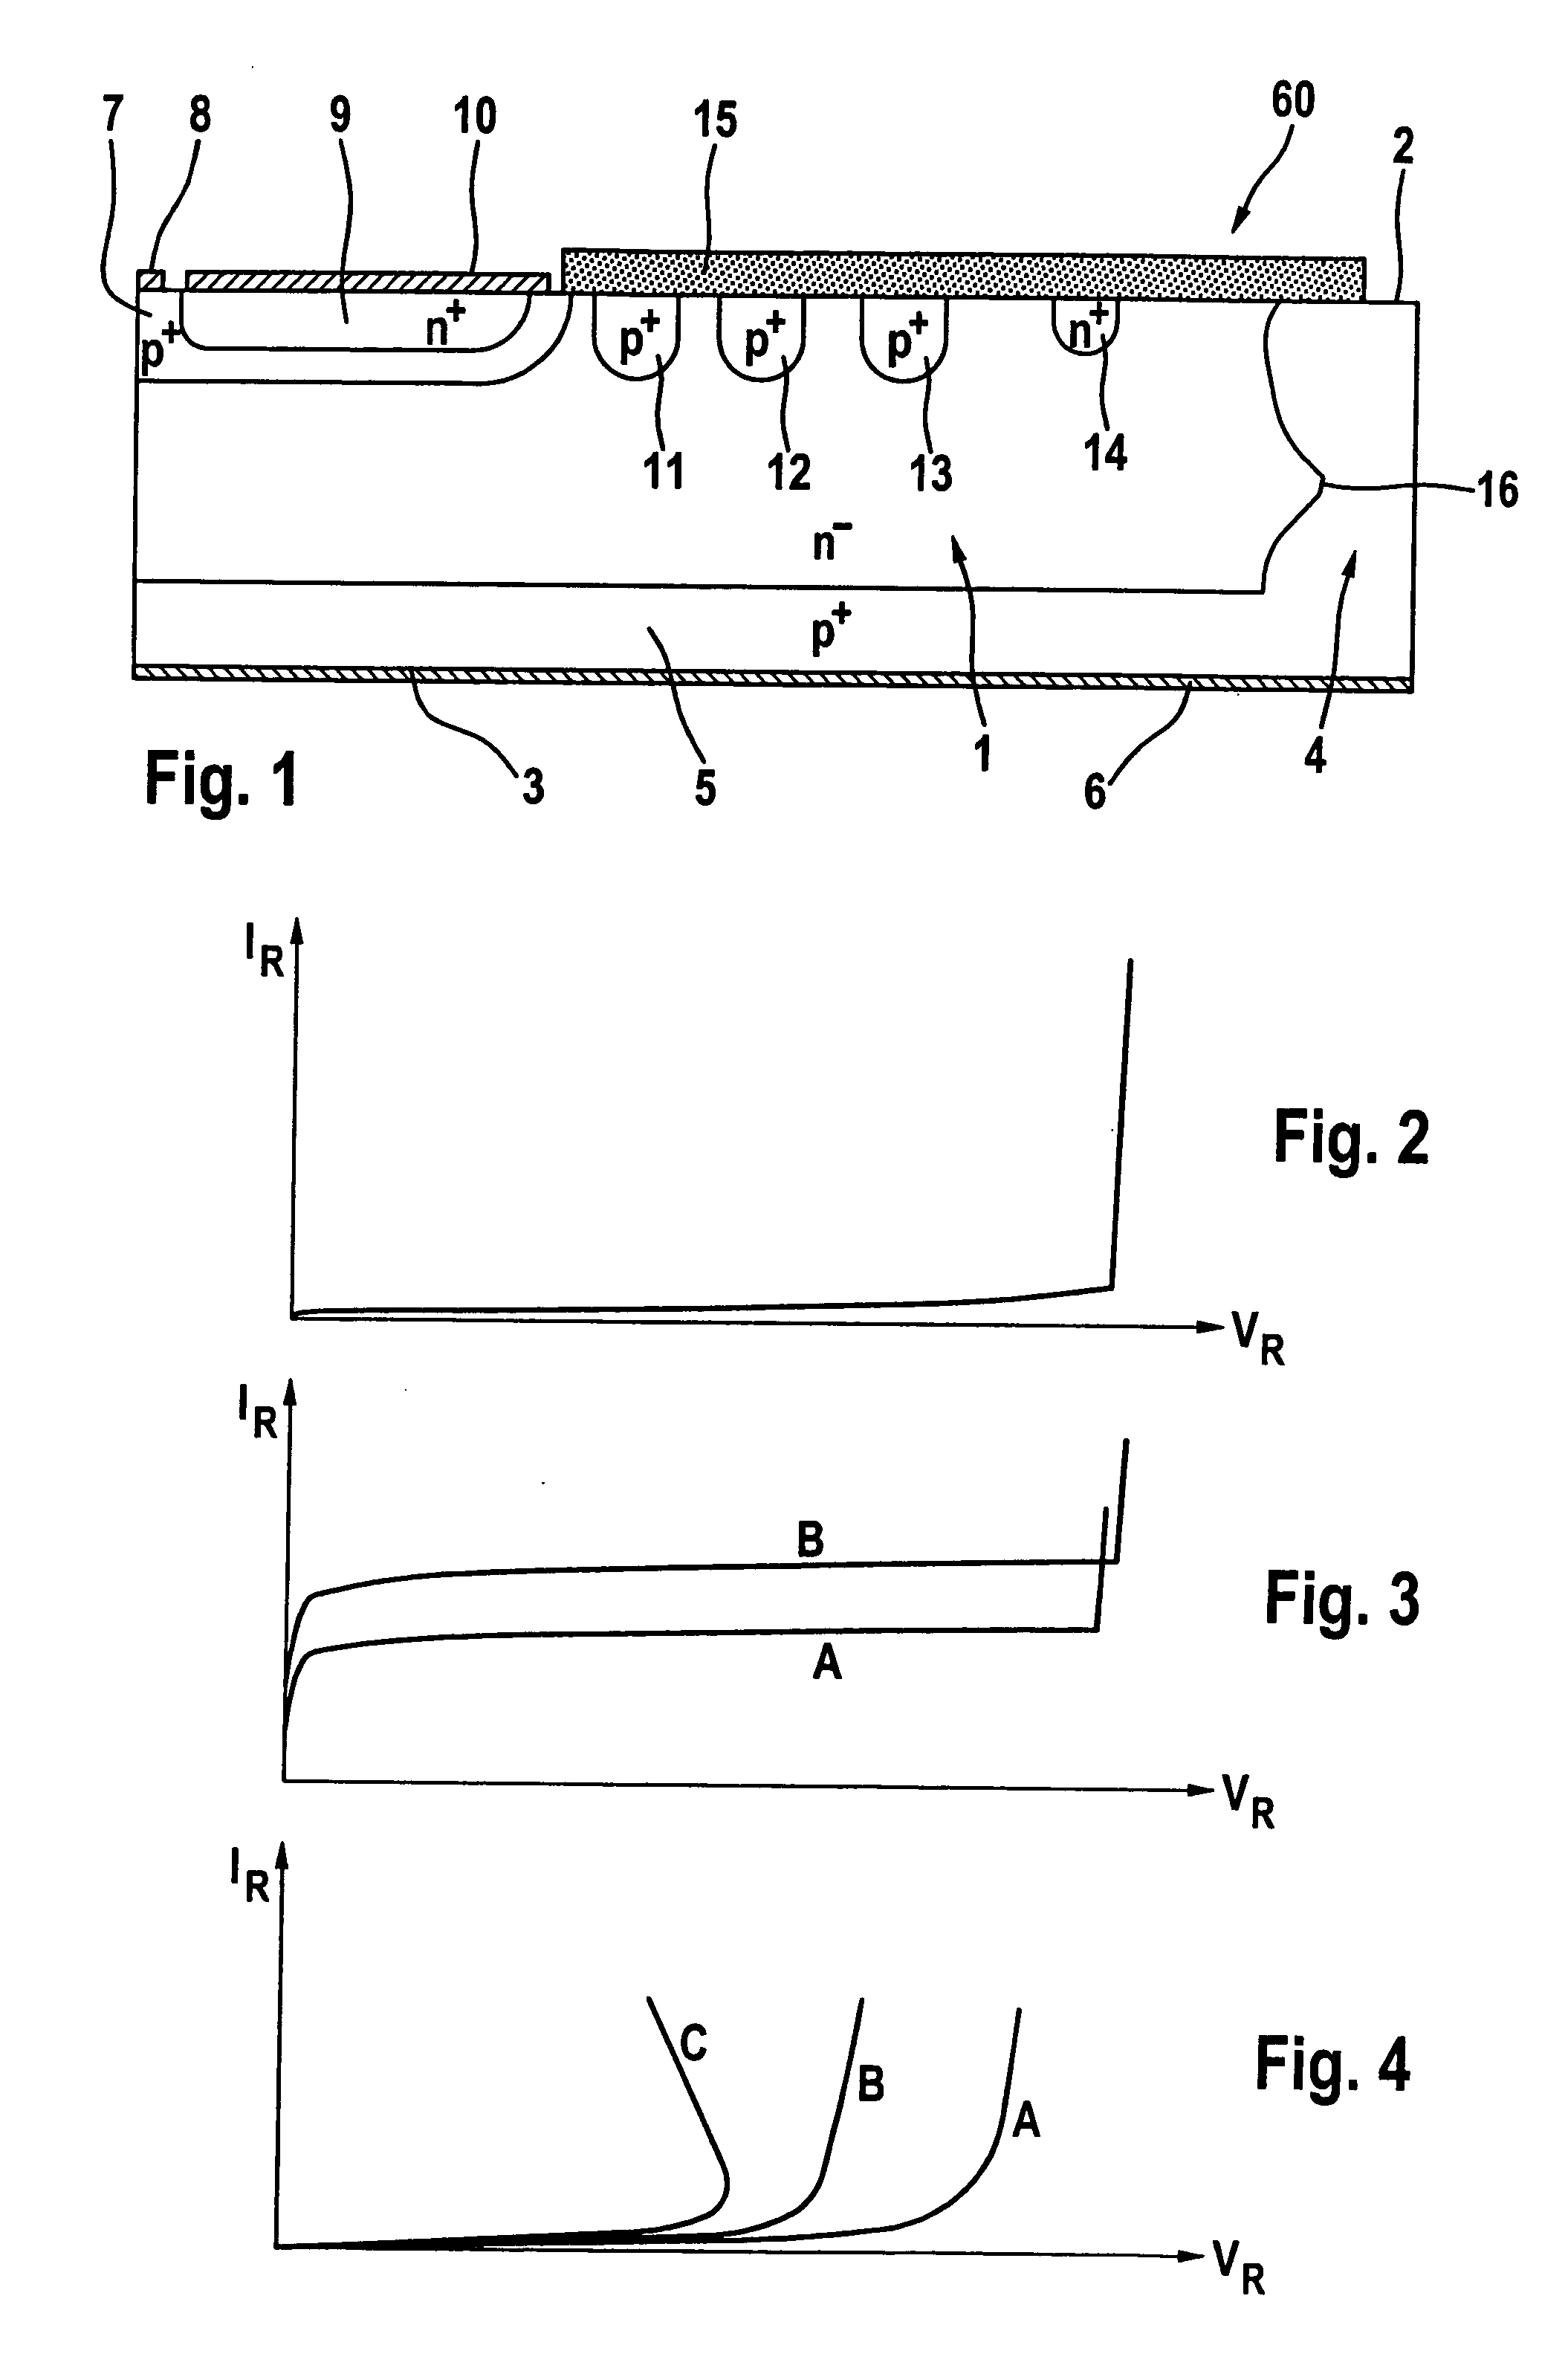 Power semiconductor component in the planar technique